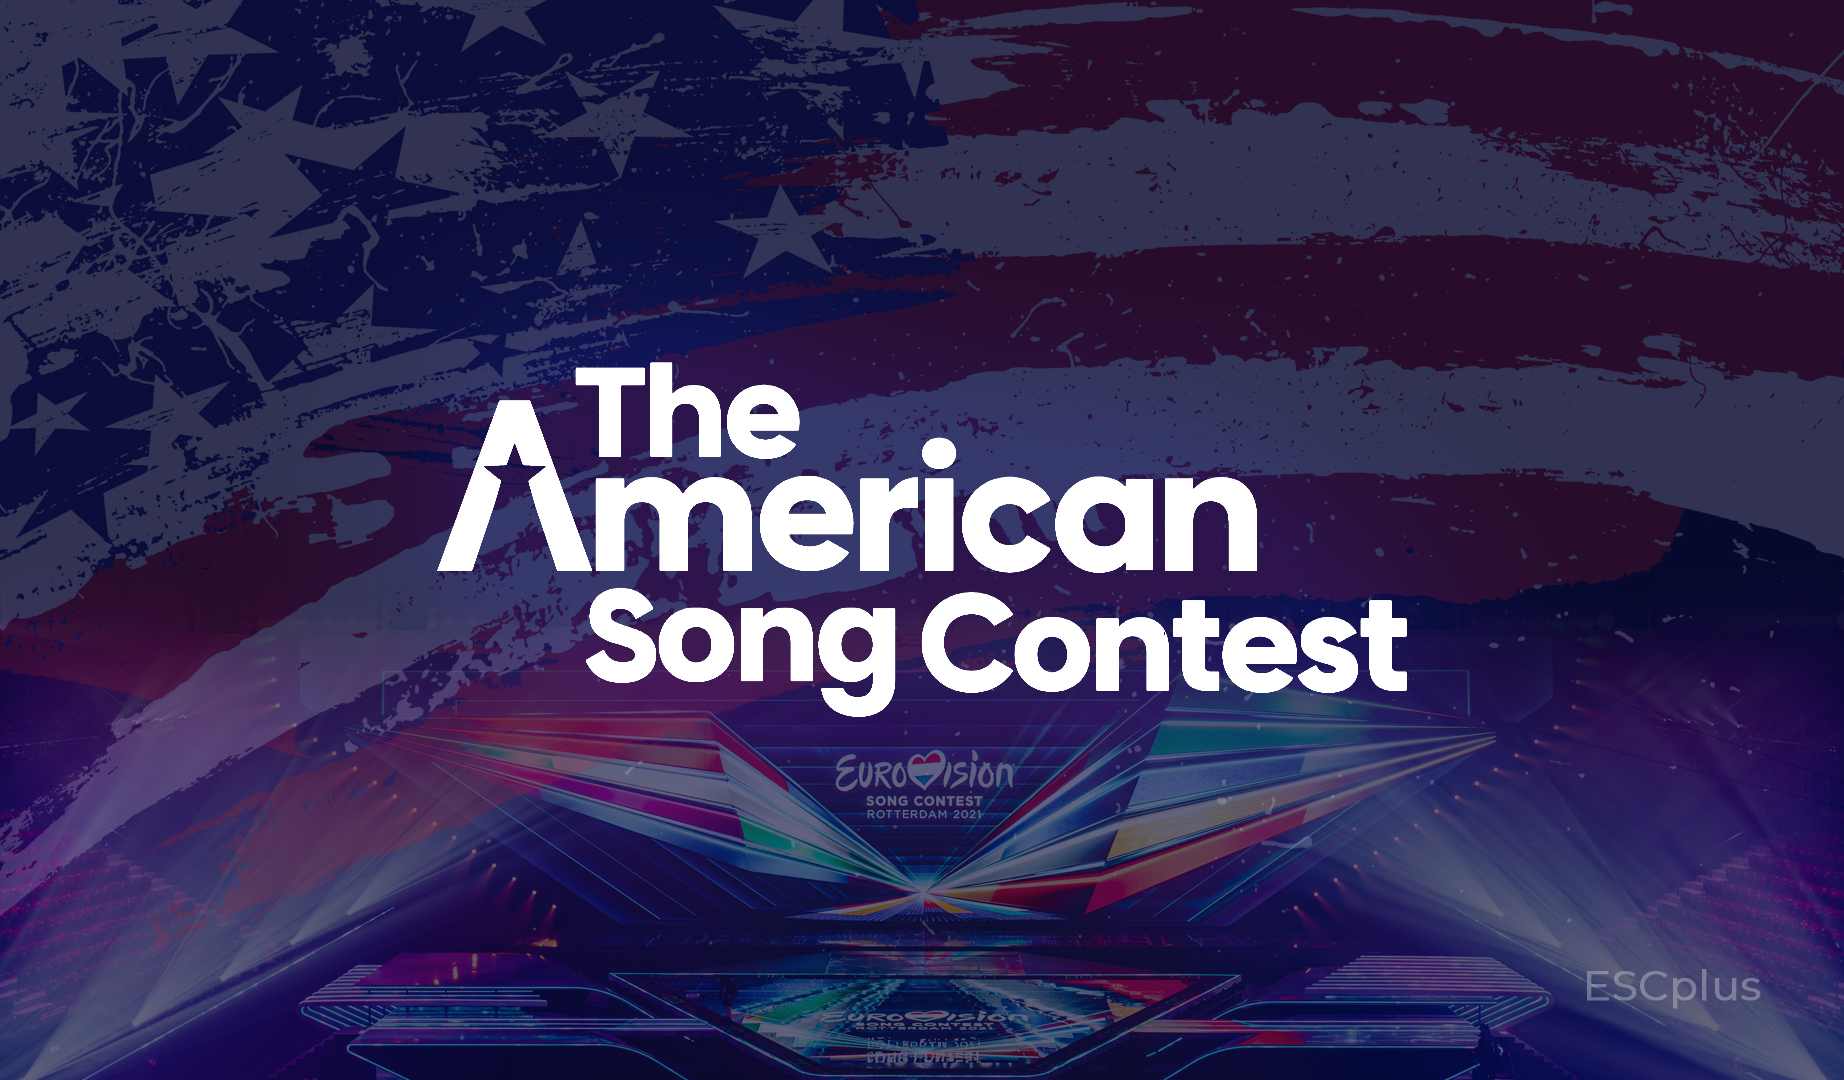 American Song Contest lands on NBC